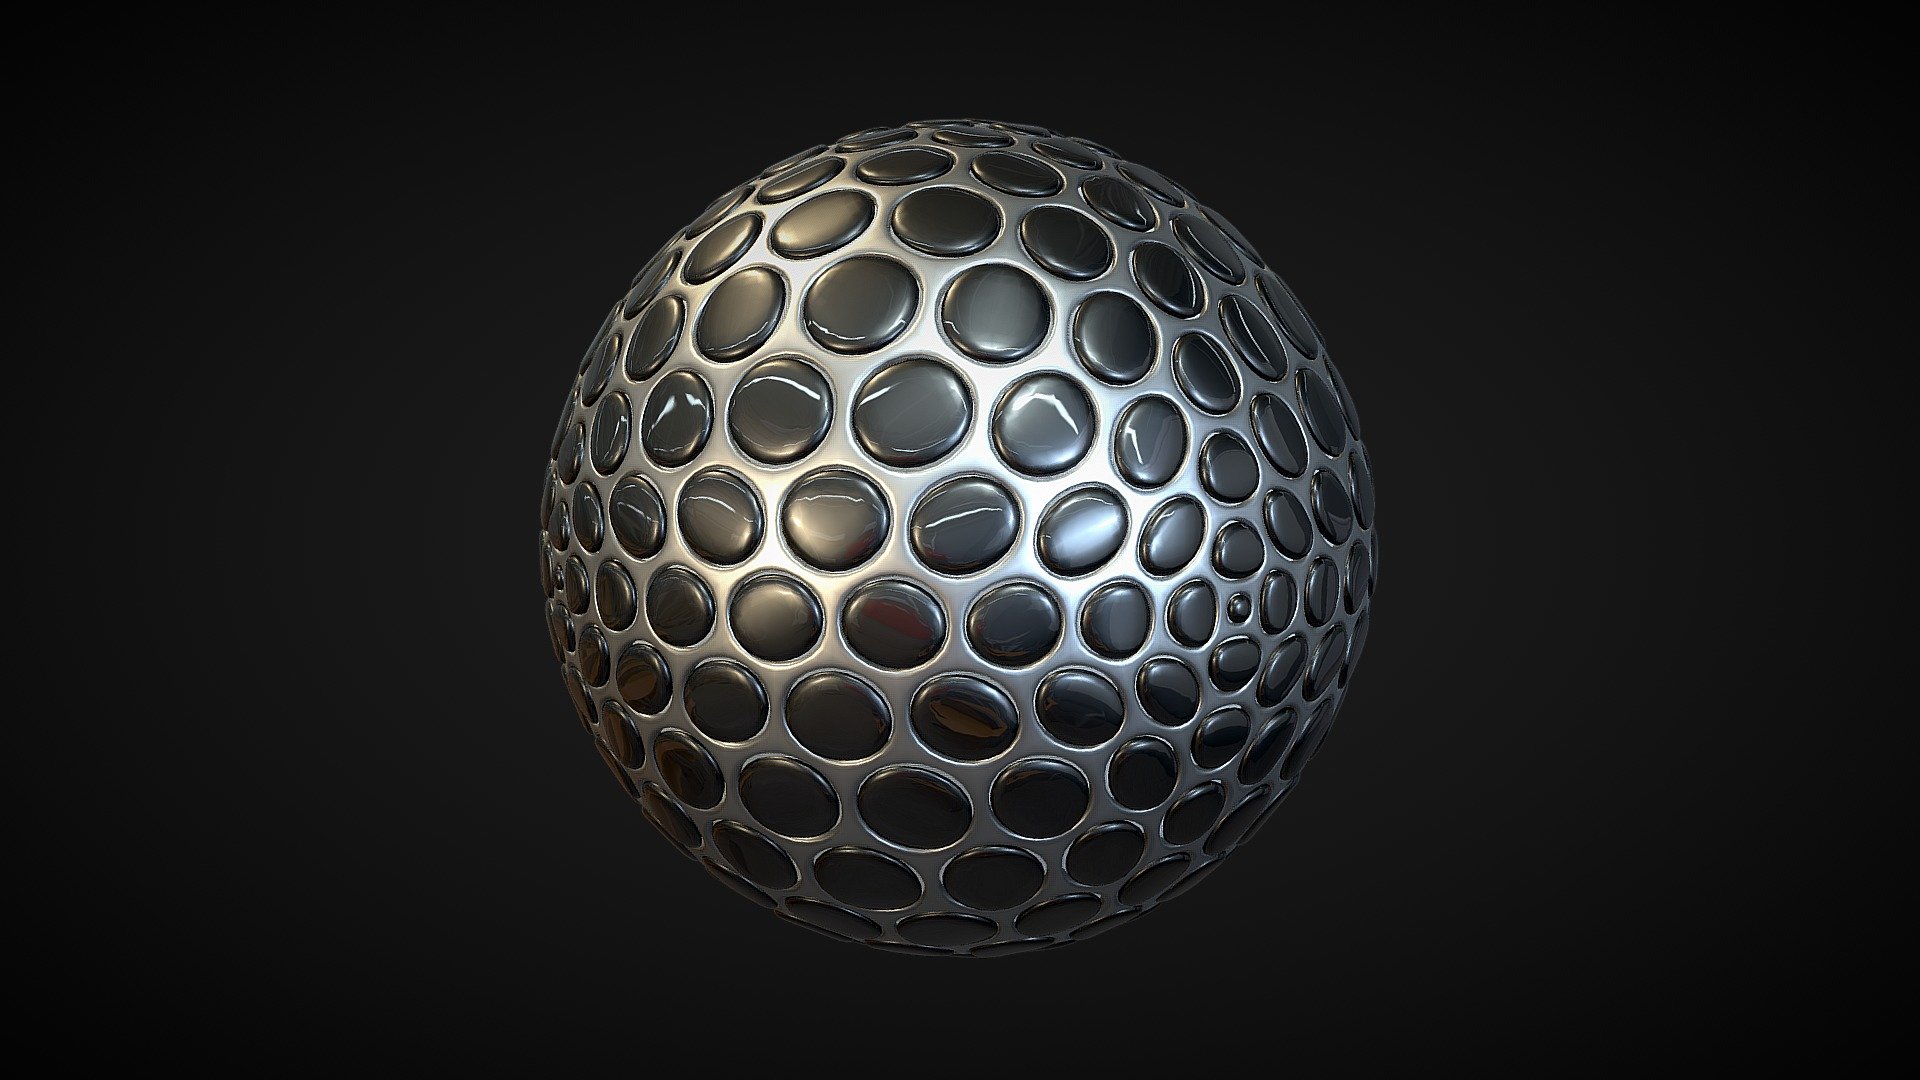 Abstract Spherical Object

3D Object by BlockedGravity - Abstract Spherical Object - Download Free 3D model by BlockedGravity 3d model